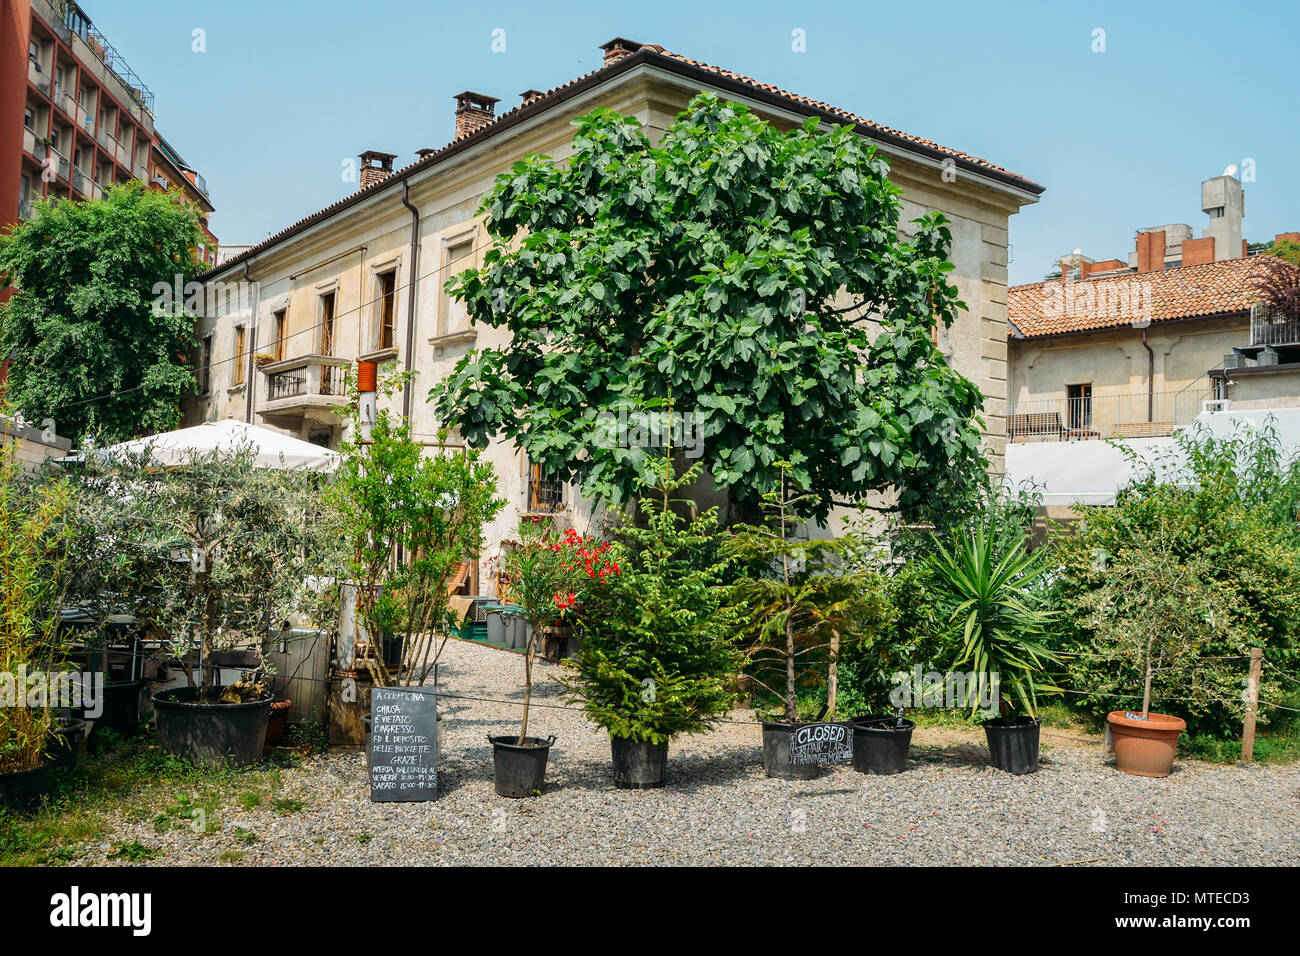 Cascina Cuccagna is the msot central of public farmhouses in the Milan area and was the subject of an exemplary urban regeneration project aimed at the restoration of the 17th century farm Stock Photo